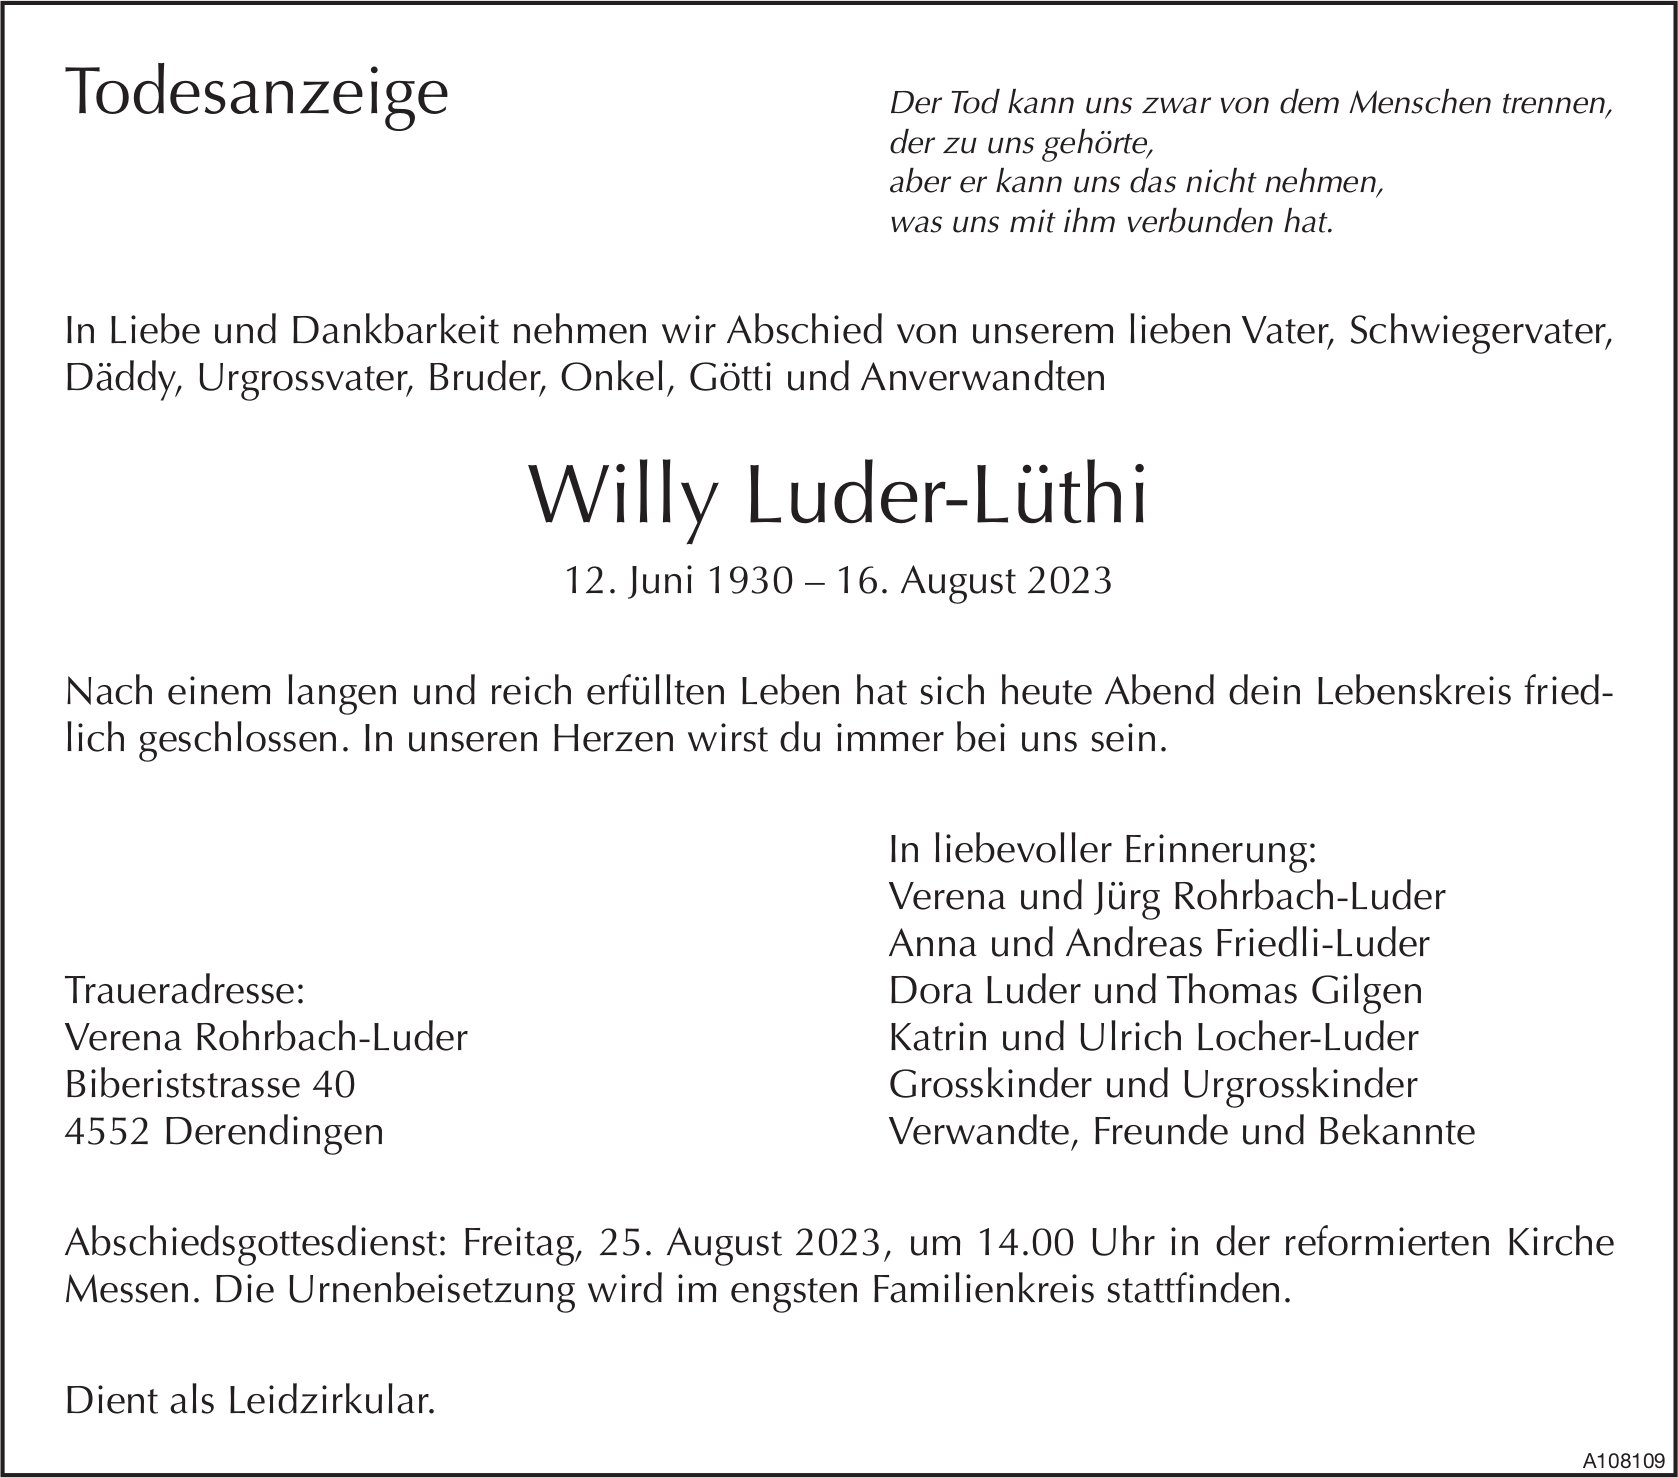 Willy Luder-Lüthi, August 2023 / TA